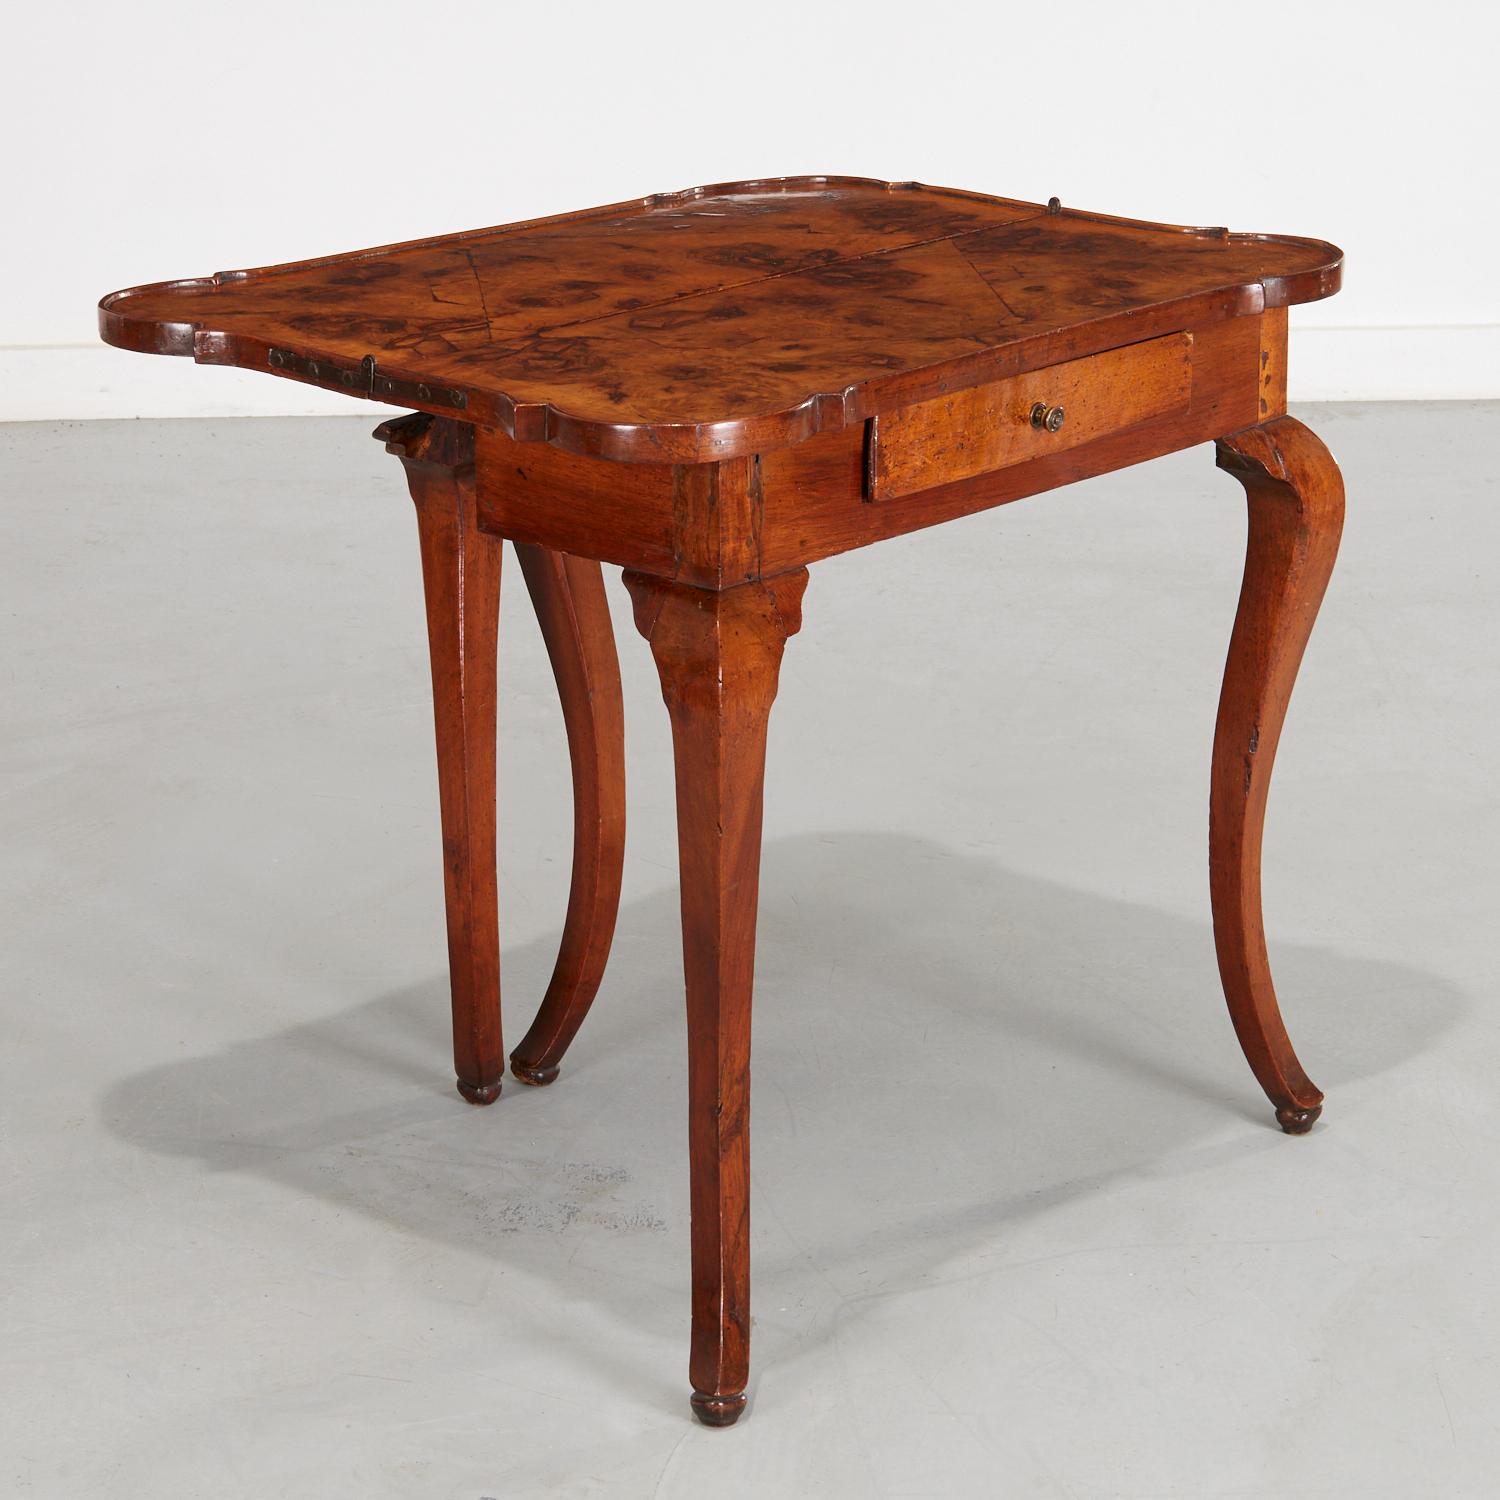 Hand-Crafted 19th C. Circassian Walnut Games Table with Bookmatched Burl Wood Top For Sale